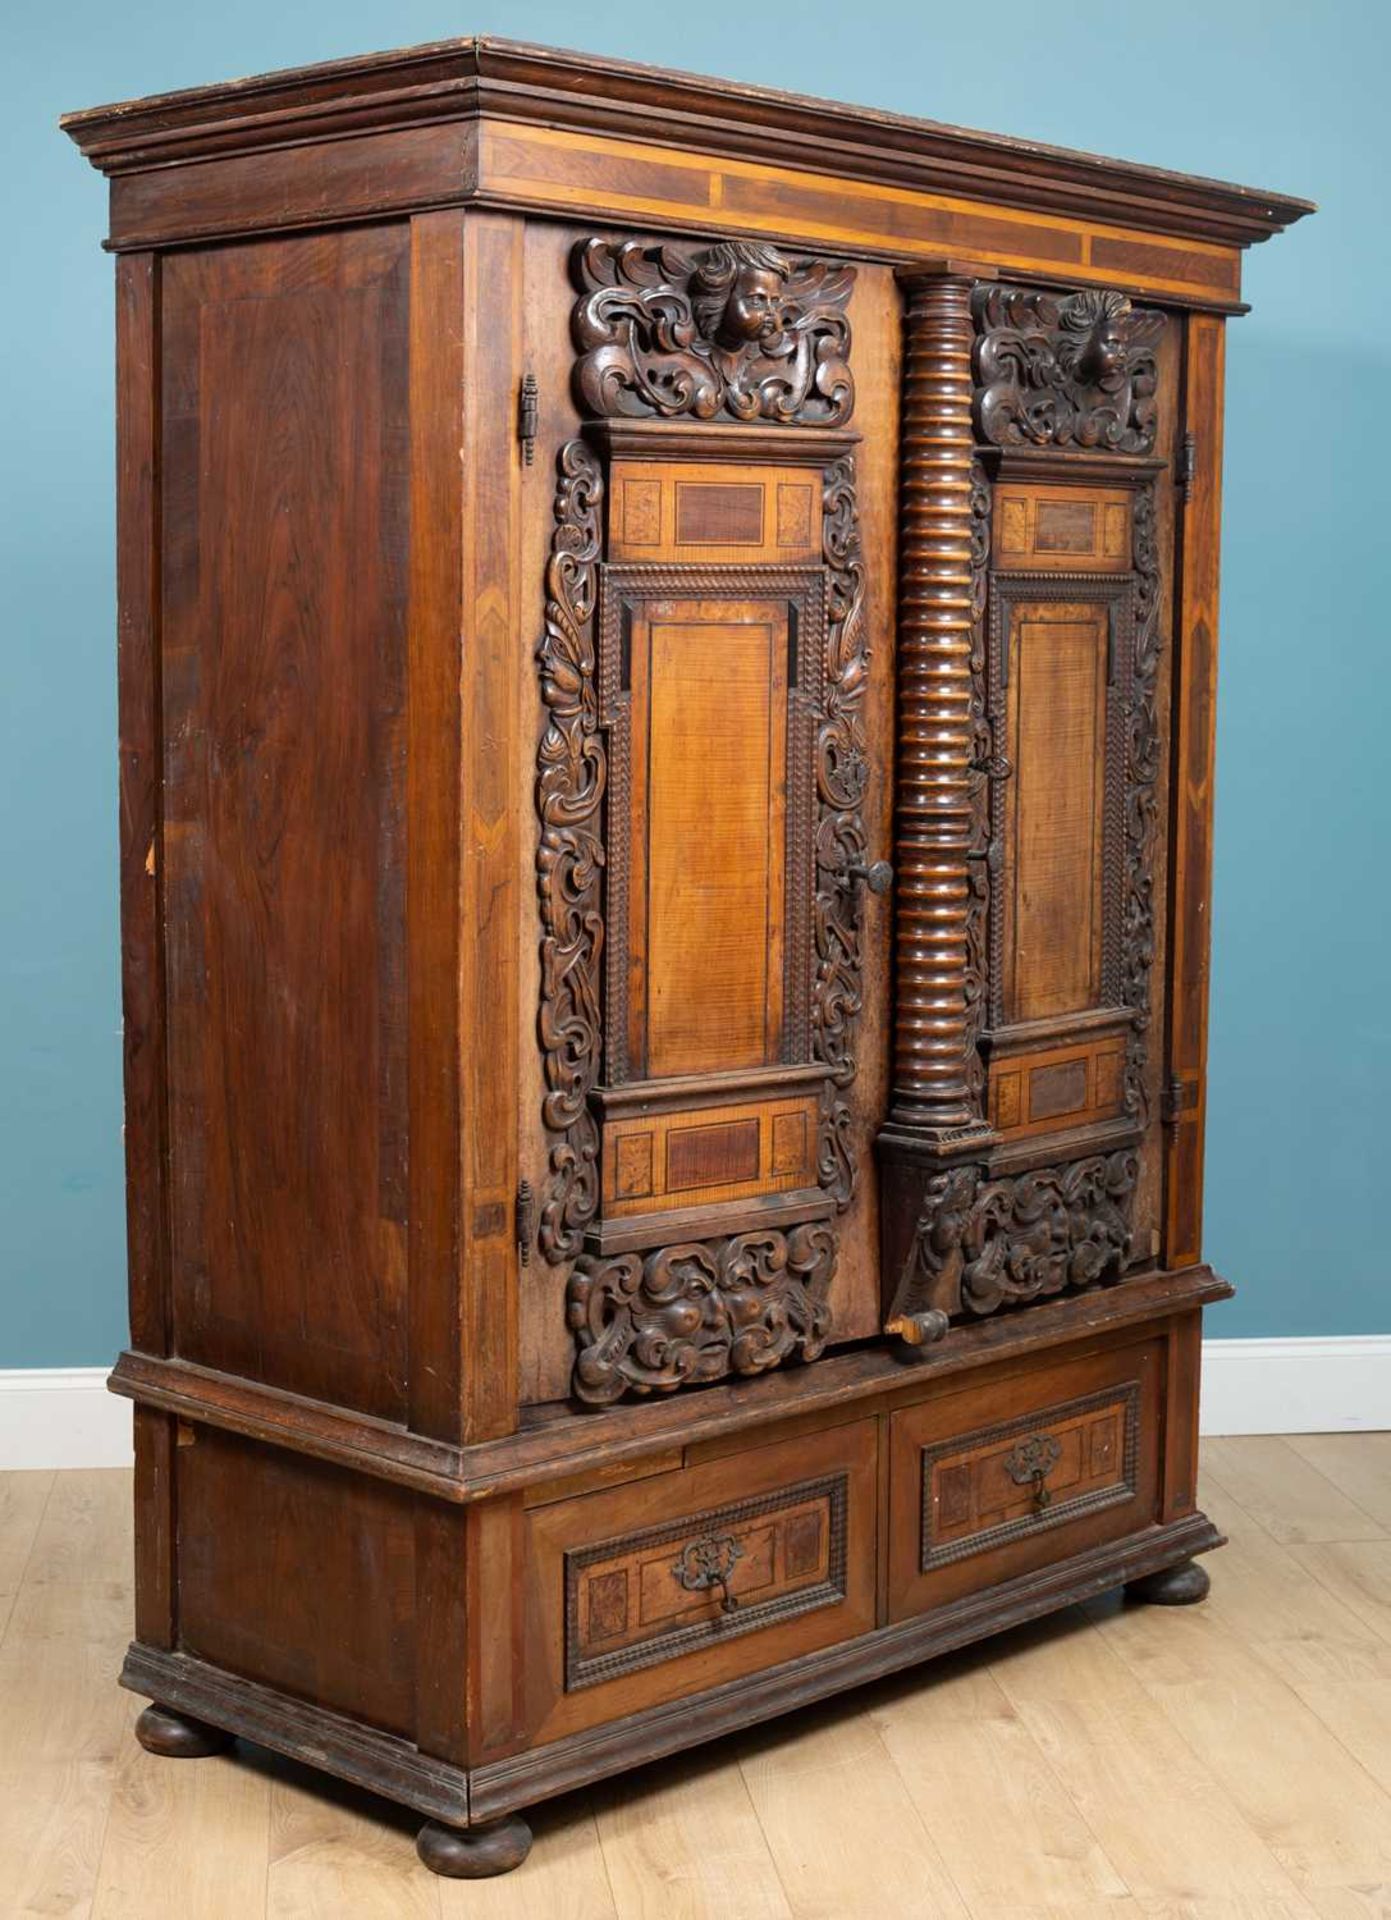 An 18th century style European armoire - Image 2 of 11